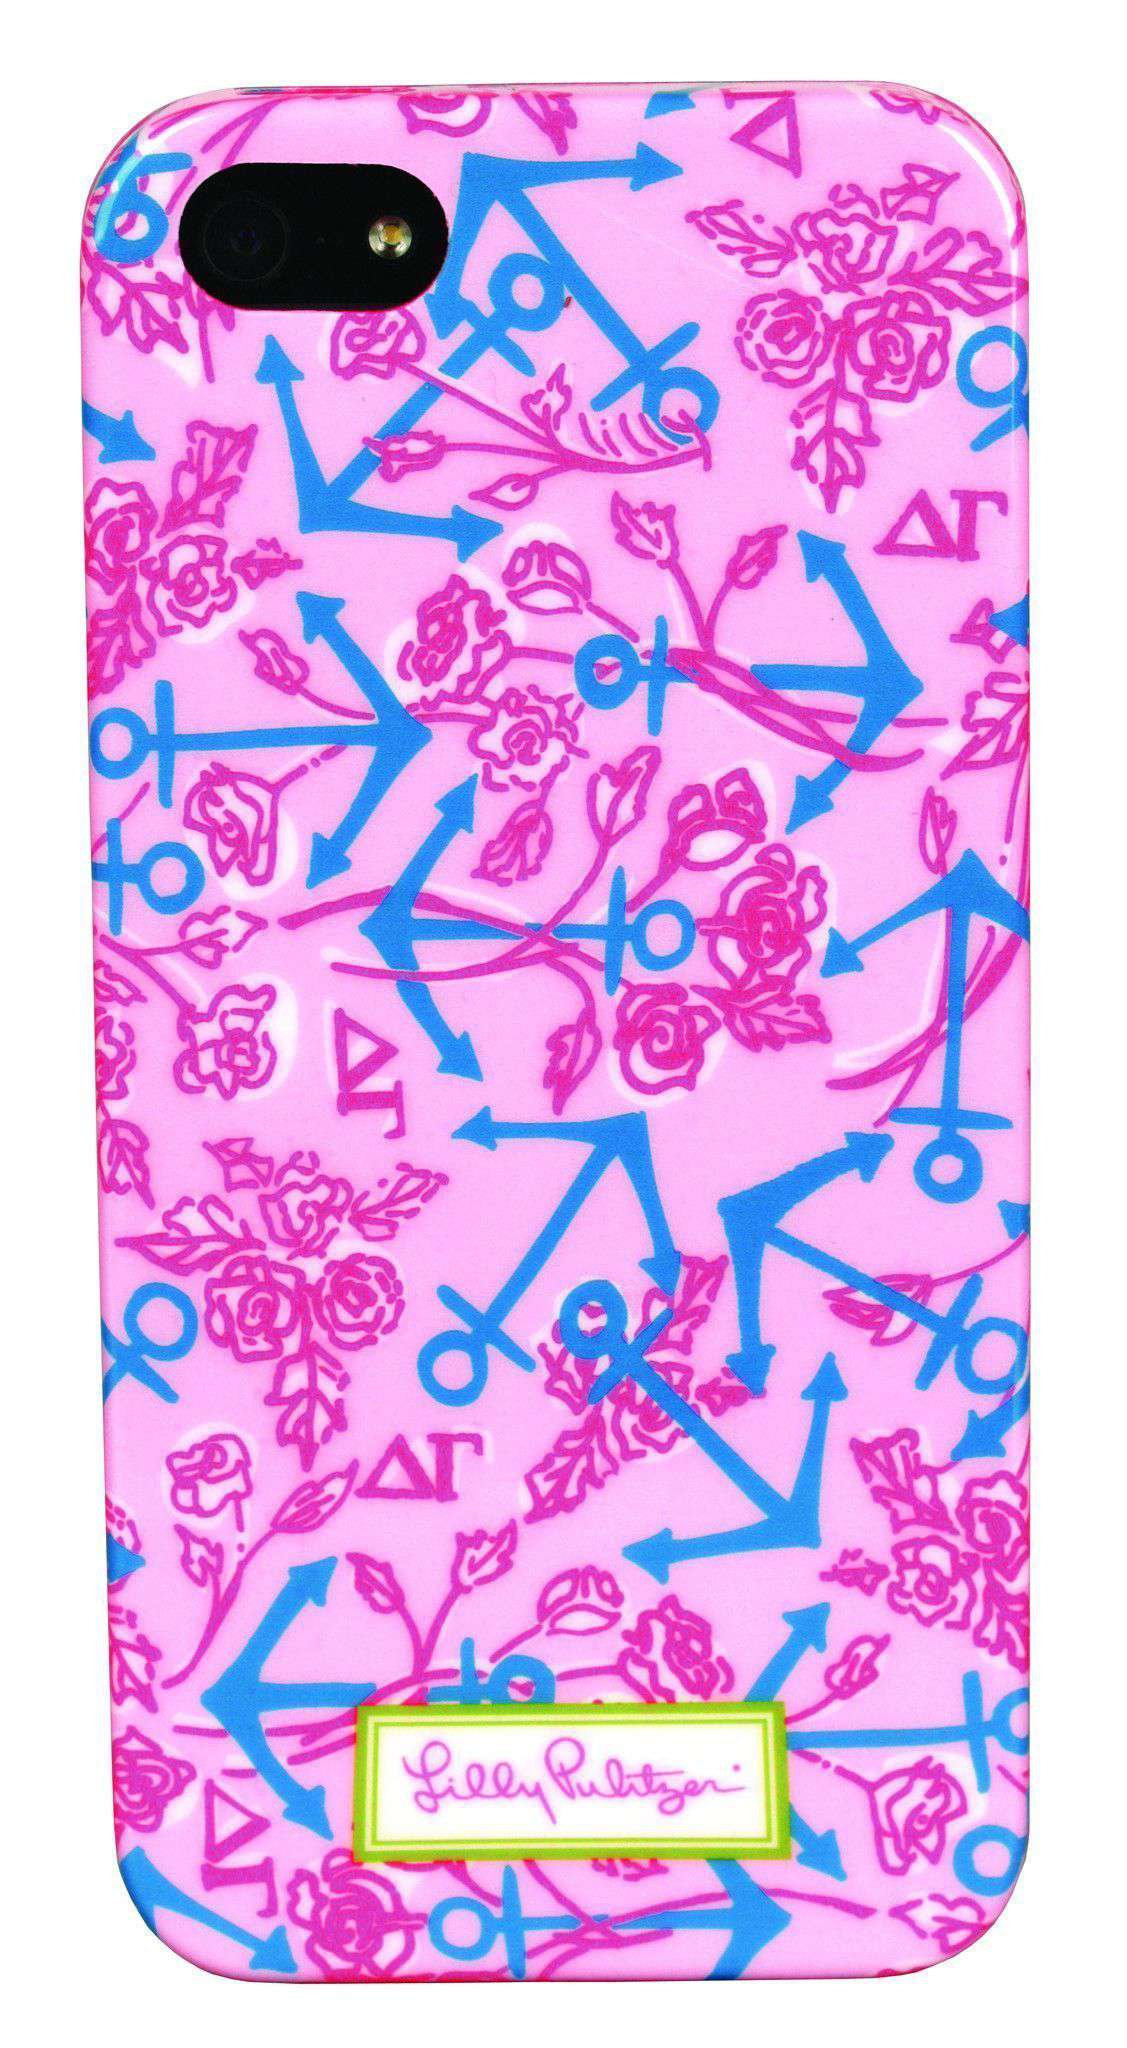 Delta Gamma iPhone 5/5s Cover by Lilly Pulitzer - Country Club Prep